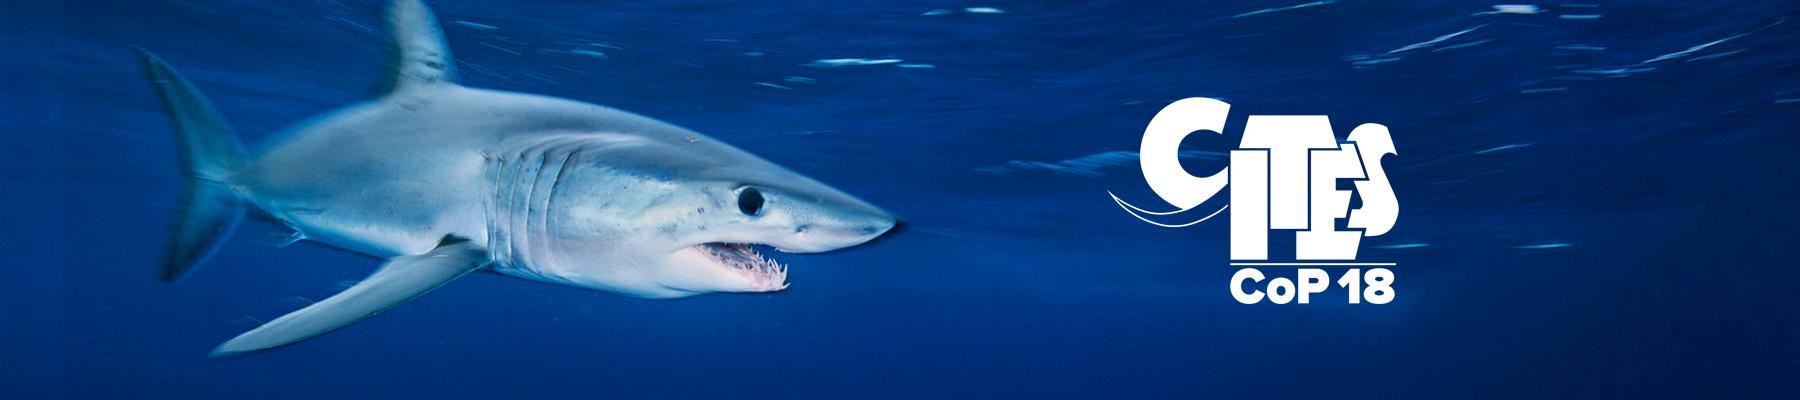 Mako Shark Isurus oxyrinchus, proposed for listing in CITES Appendix II. Photo: Brian J. Skerry / National Geographic Stock / WWF